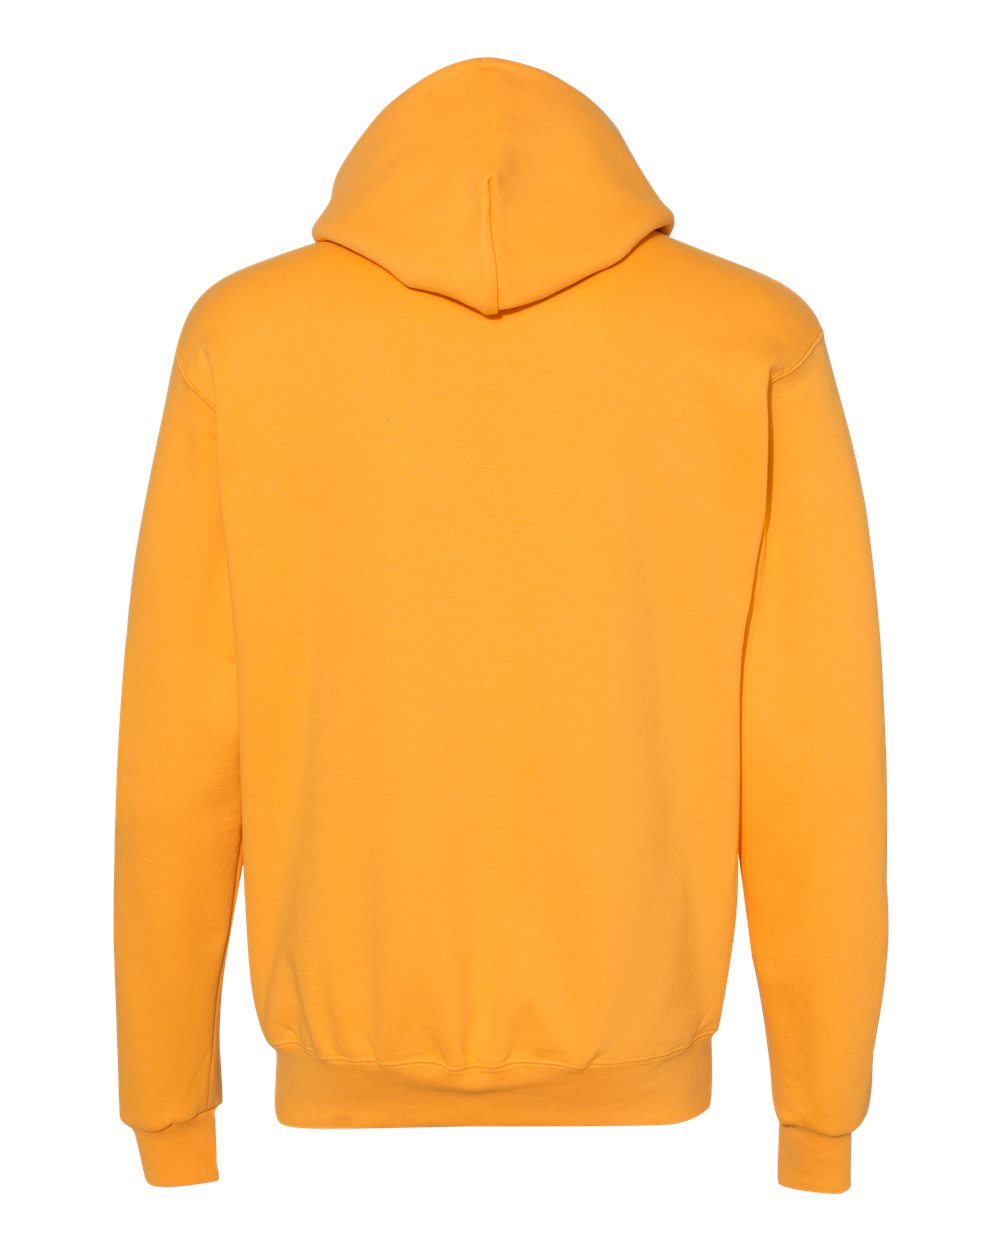 Champion Powerblend® Hooded Sweatshirt S700 #color_Gold